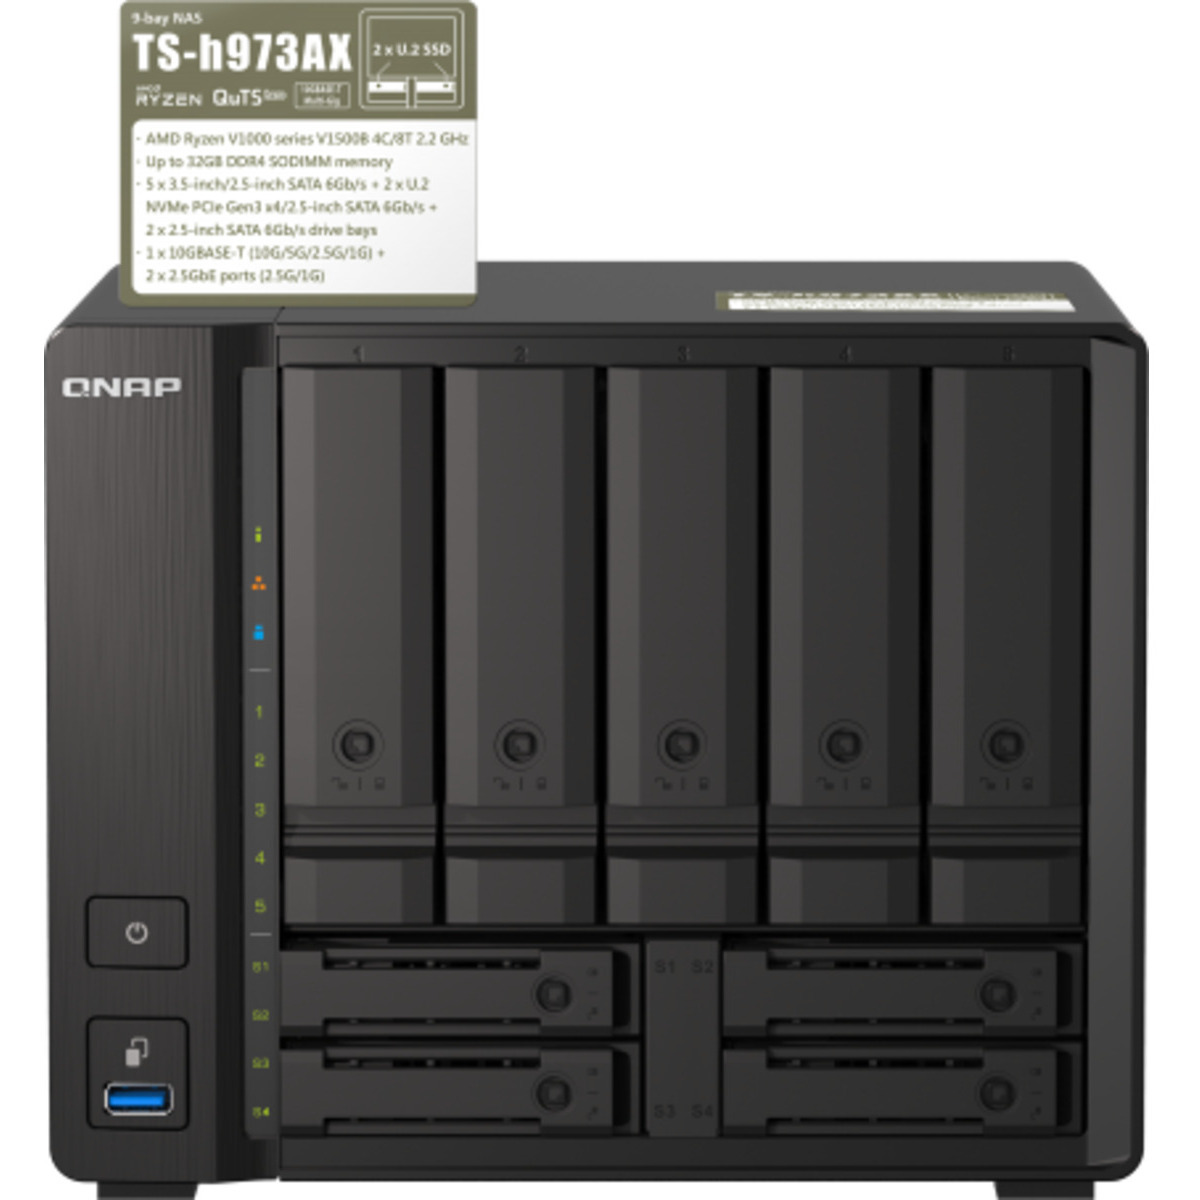 QNAP TS-h973AX  6tb 5+4-Bay Desktop Multimedia / Power User / Business NAS - Network Attached Storage Device 3x2tb Crucial MX500 CT2000MX500SSD1 2.5 560/510MB/s SATA 6Gb/s SSD CONSUMER Class Drives Installed - Burn-In Tested TS-h973AX 